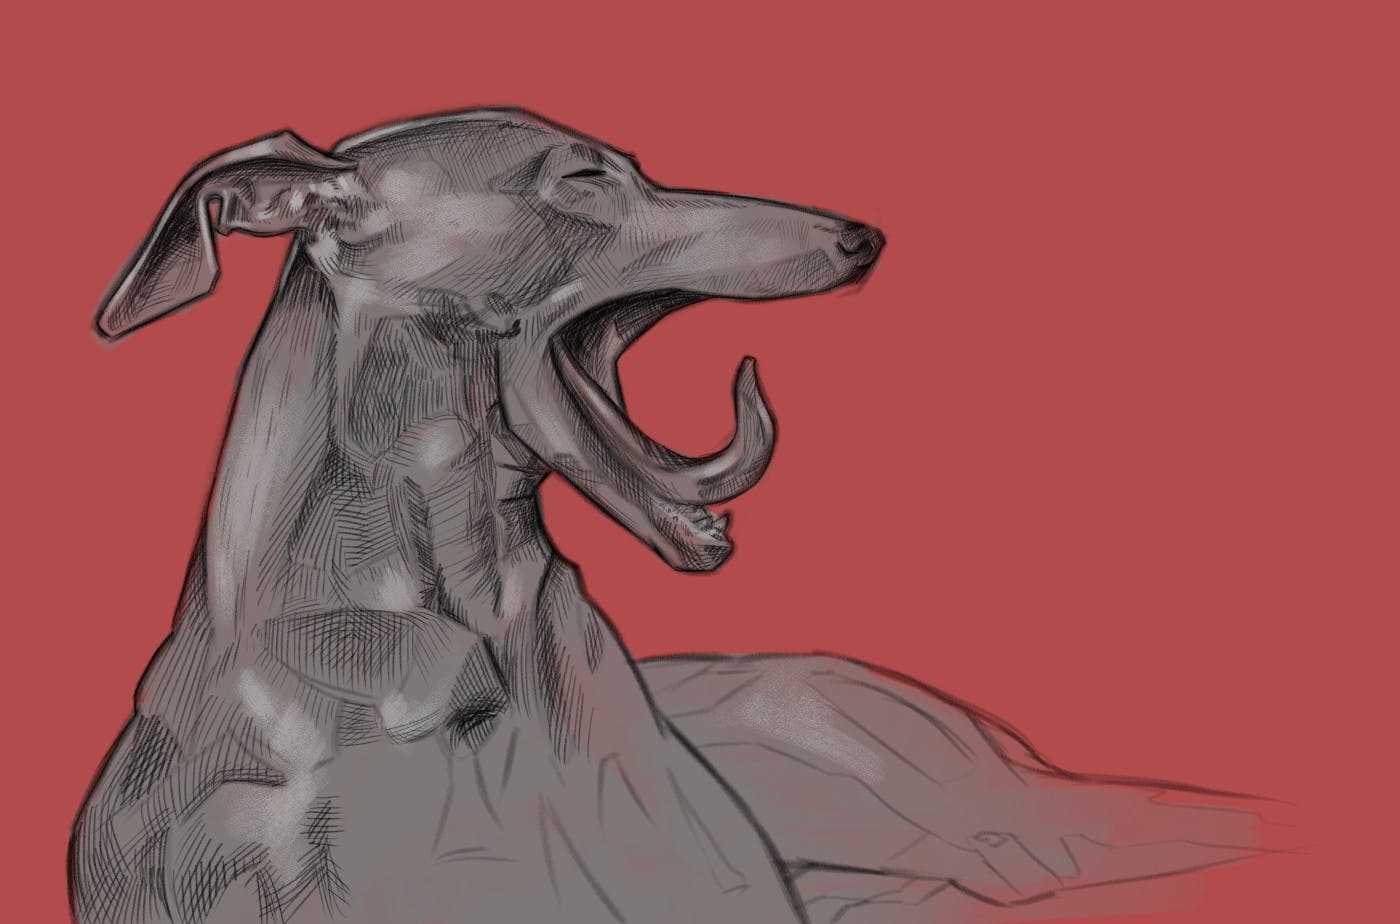 A digital drawing of a dog with a long narrow snout and slim ears in greyscale using hatching against a bright salmon background; the dog is in profile and yawning.